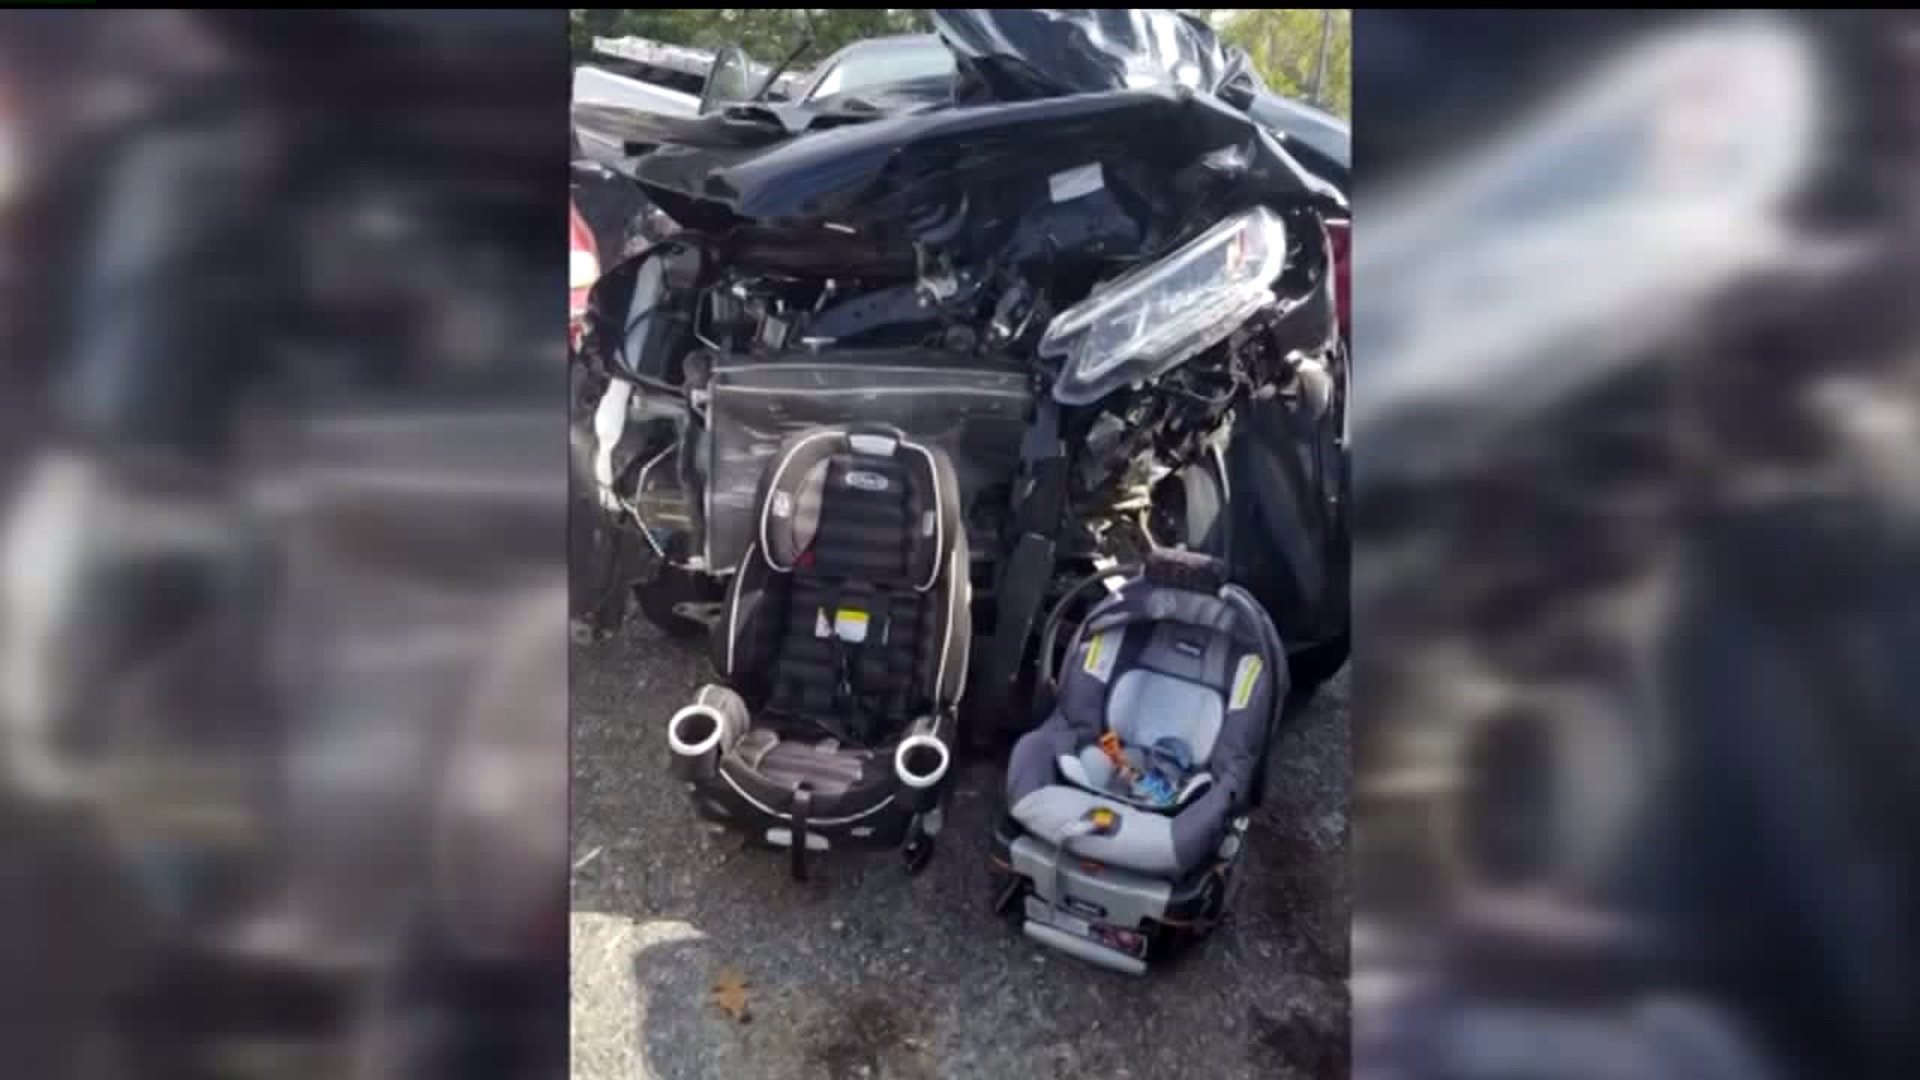 Baby and toddler unharmed after car crash, moms thanks car seats